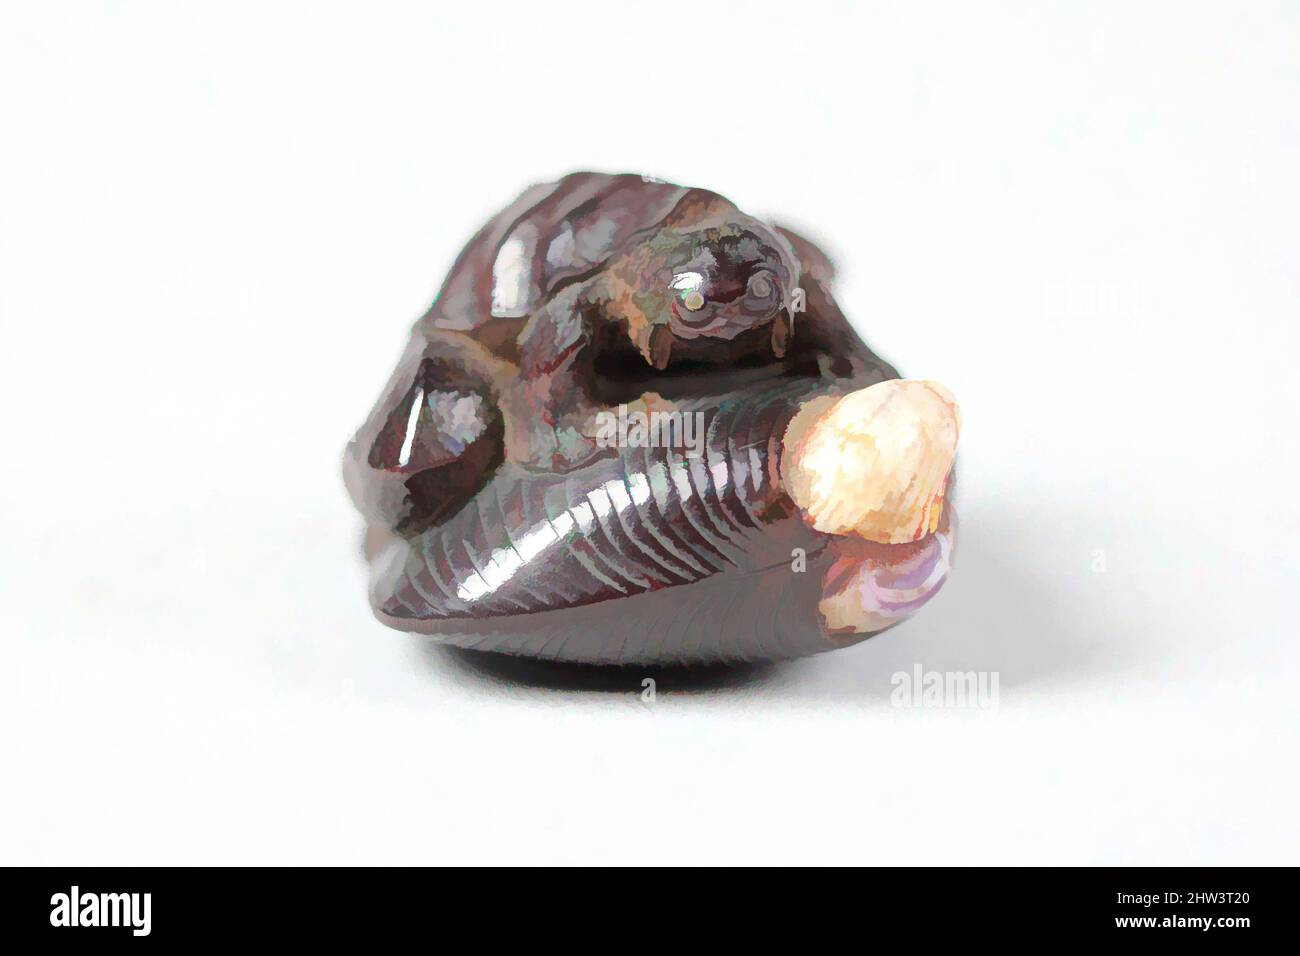 Art inspired by Netsuke of Frog-like Tortoise on a Shell, 18th century, Japan, Wood, H. 1 in. (2.5 cm); W. 1 1/2 in. (3.8 cm); D. 1 3/8 in. (3.5 cm), Netsuke, Classic works modernized by Artotop with a splash of modernity. Shapes, color and value, eye-catching visual impact on art. Emotions through freedom of artworks in a contemporary way. A timeless message pursuing a wildly creative new direction. Artists turning to the digital medium and creating the Artotop NFT Stock Photo